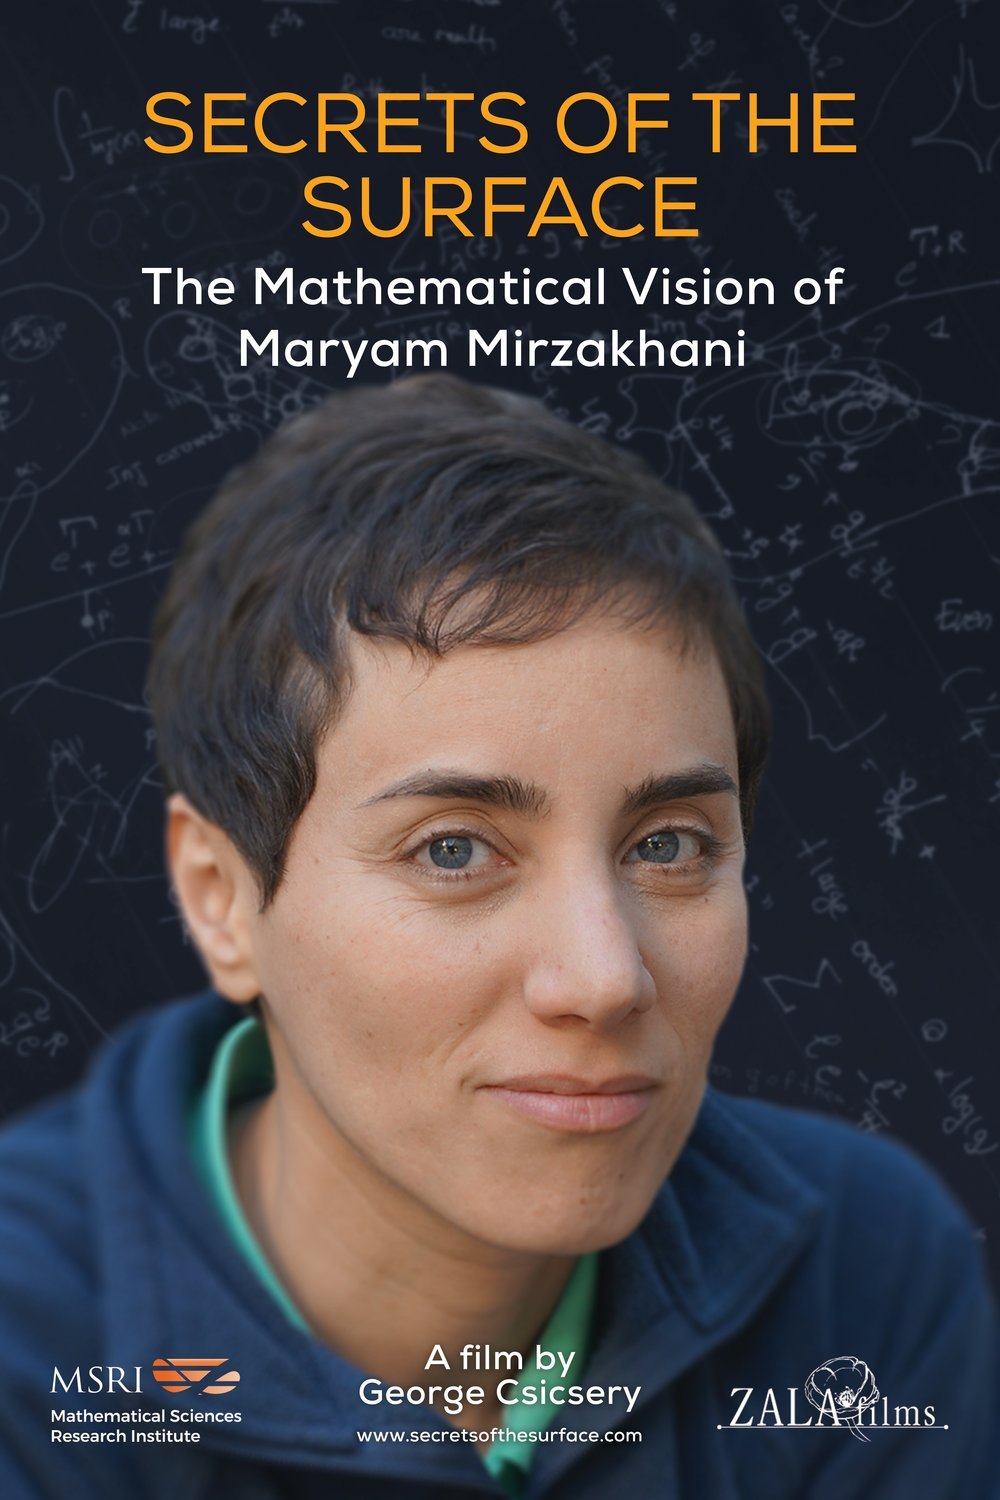 Poster of the movie Secrets of the Surface: The Mathematical Vision of Maryam Mirzakhani